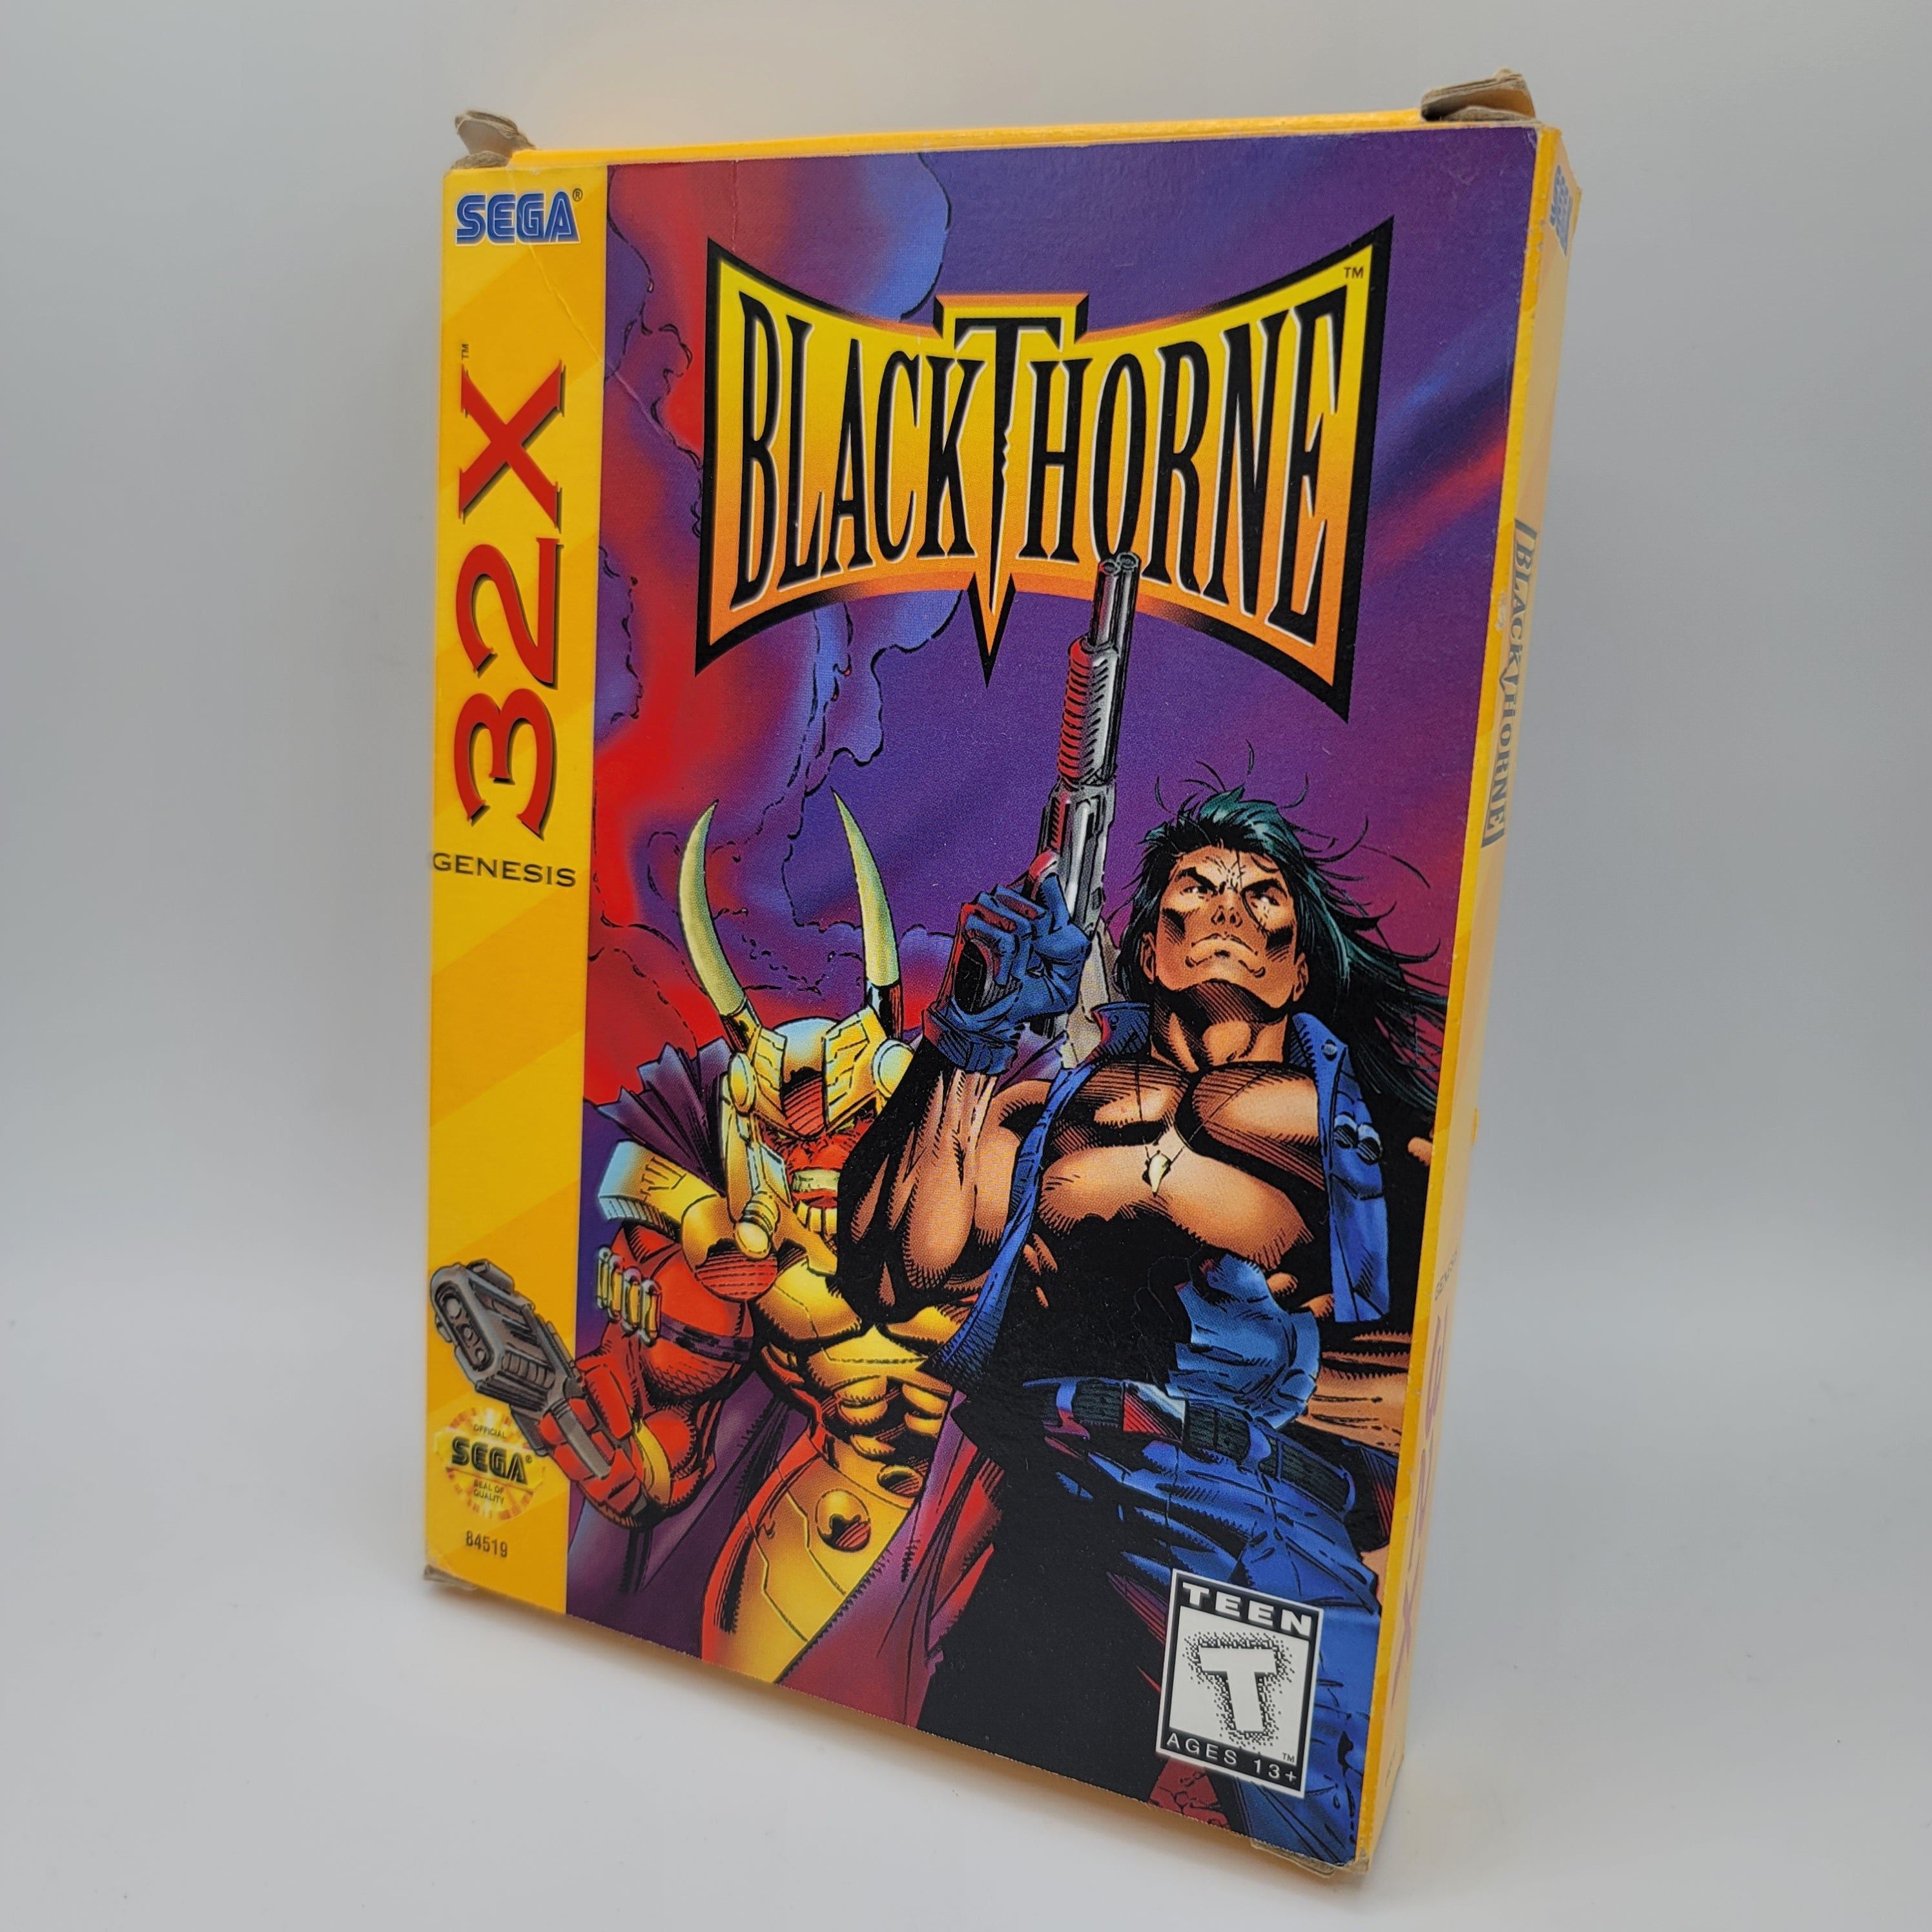 32X - BlackThorne (Complete in Box / With Manual)